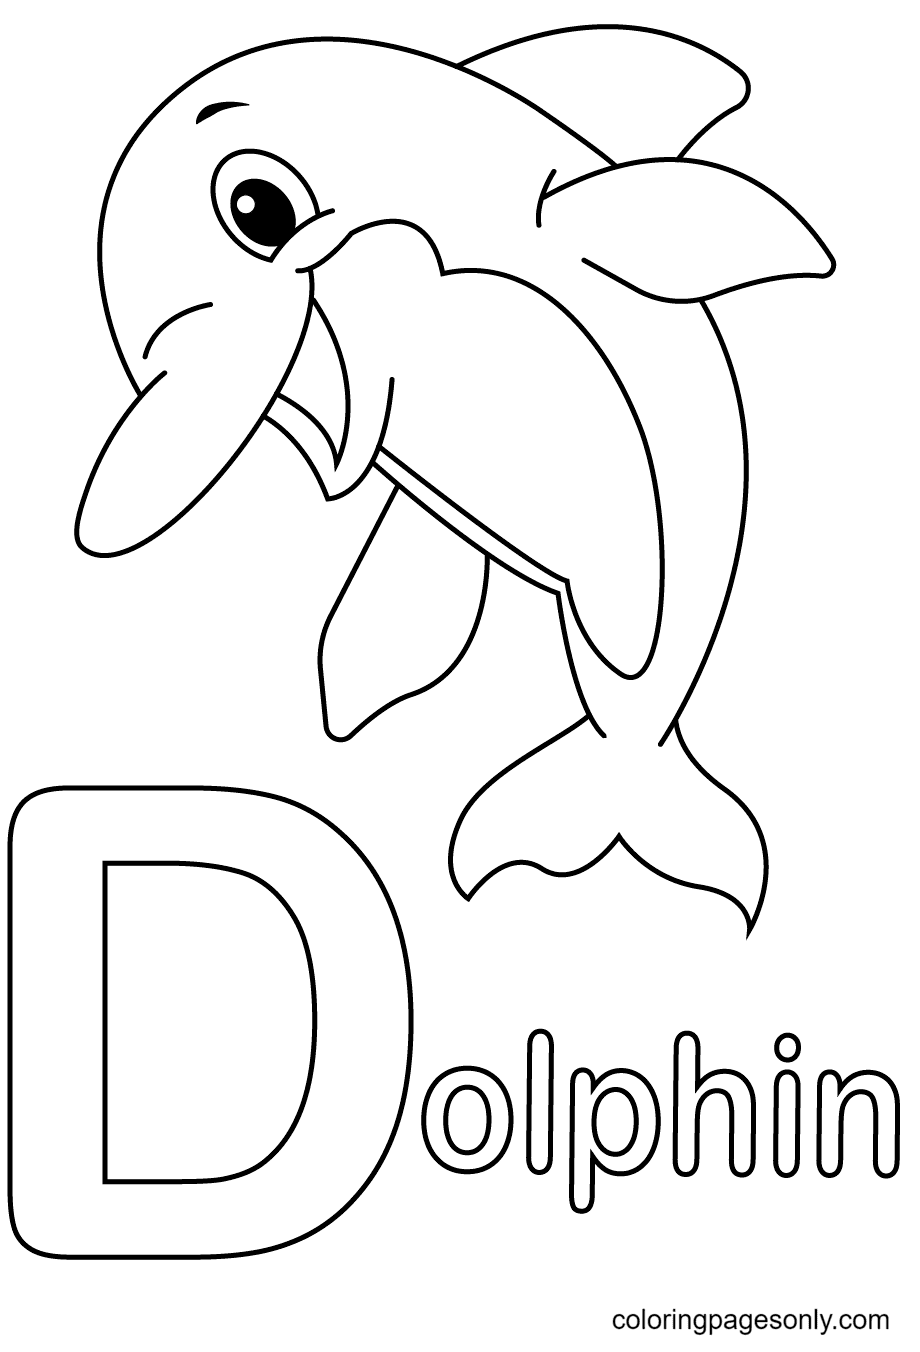 Letter D is for Duck Coloring Pages - Free Printable Coloring Pages